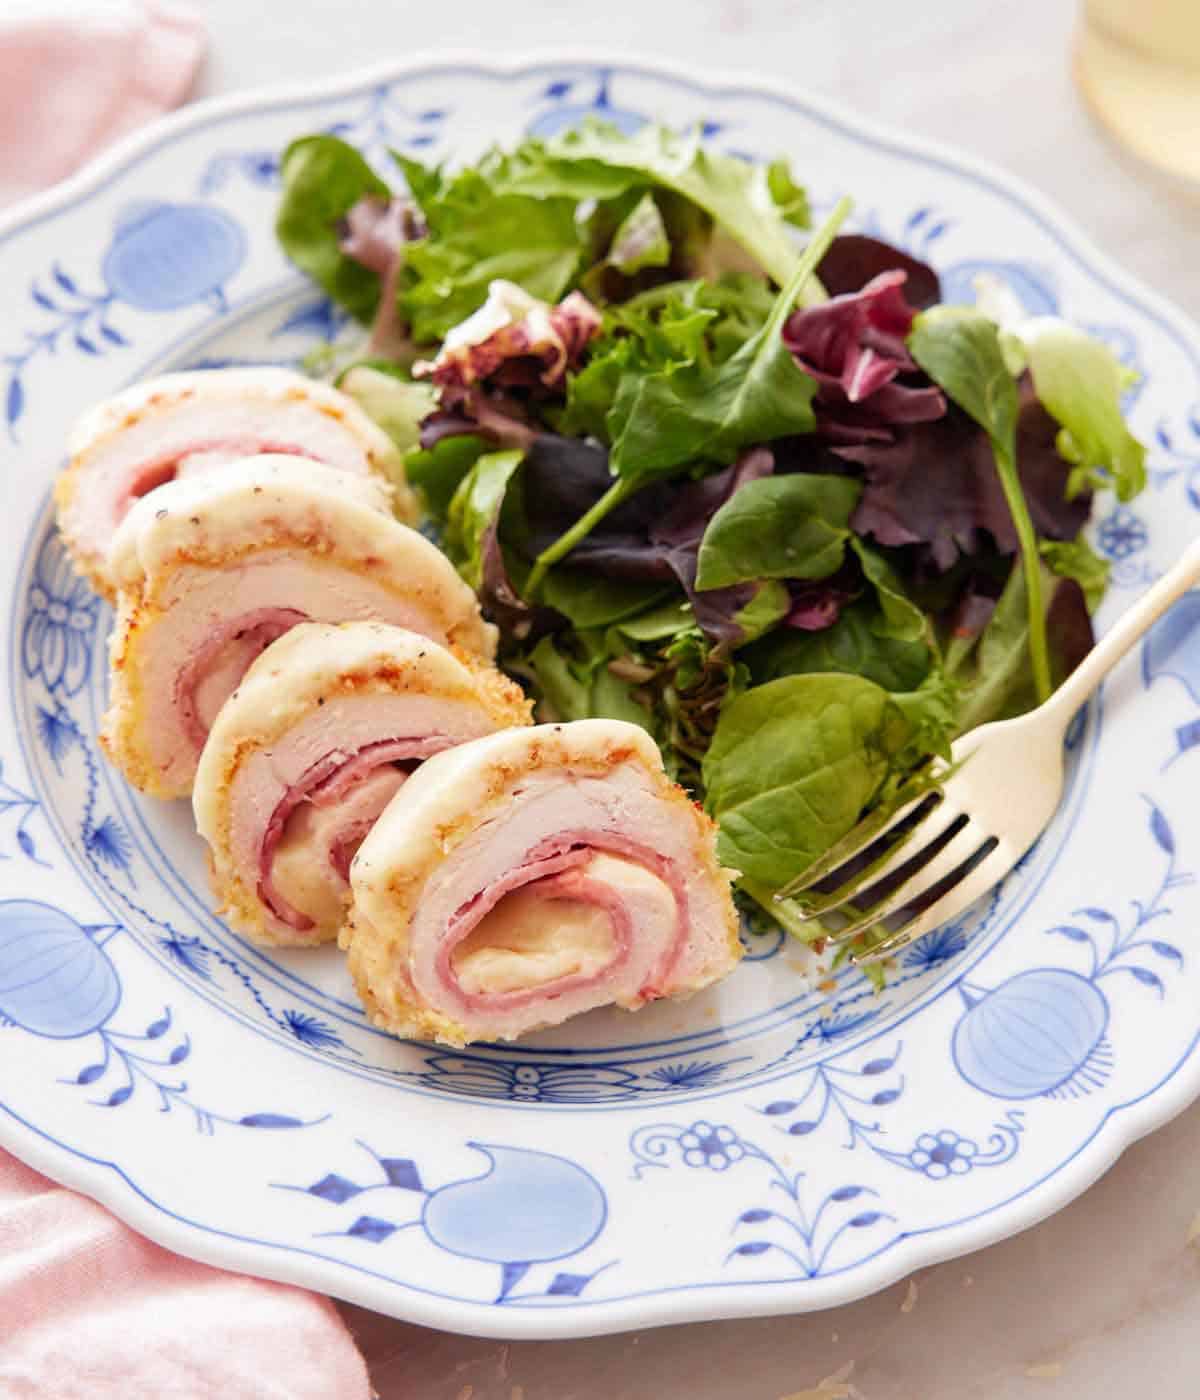 A plate with a chicken cordon bleu sliced with a side of salad with a fork.